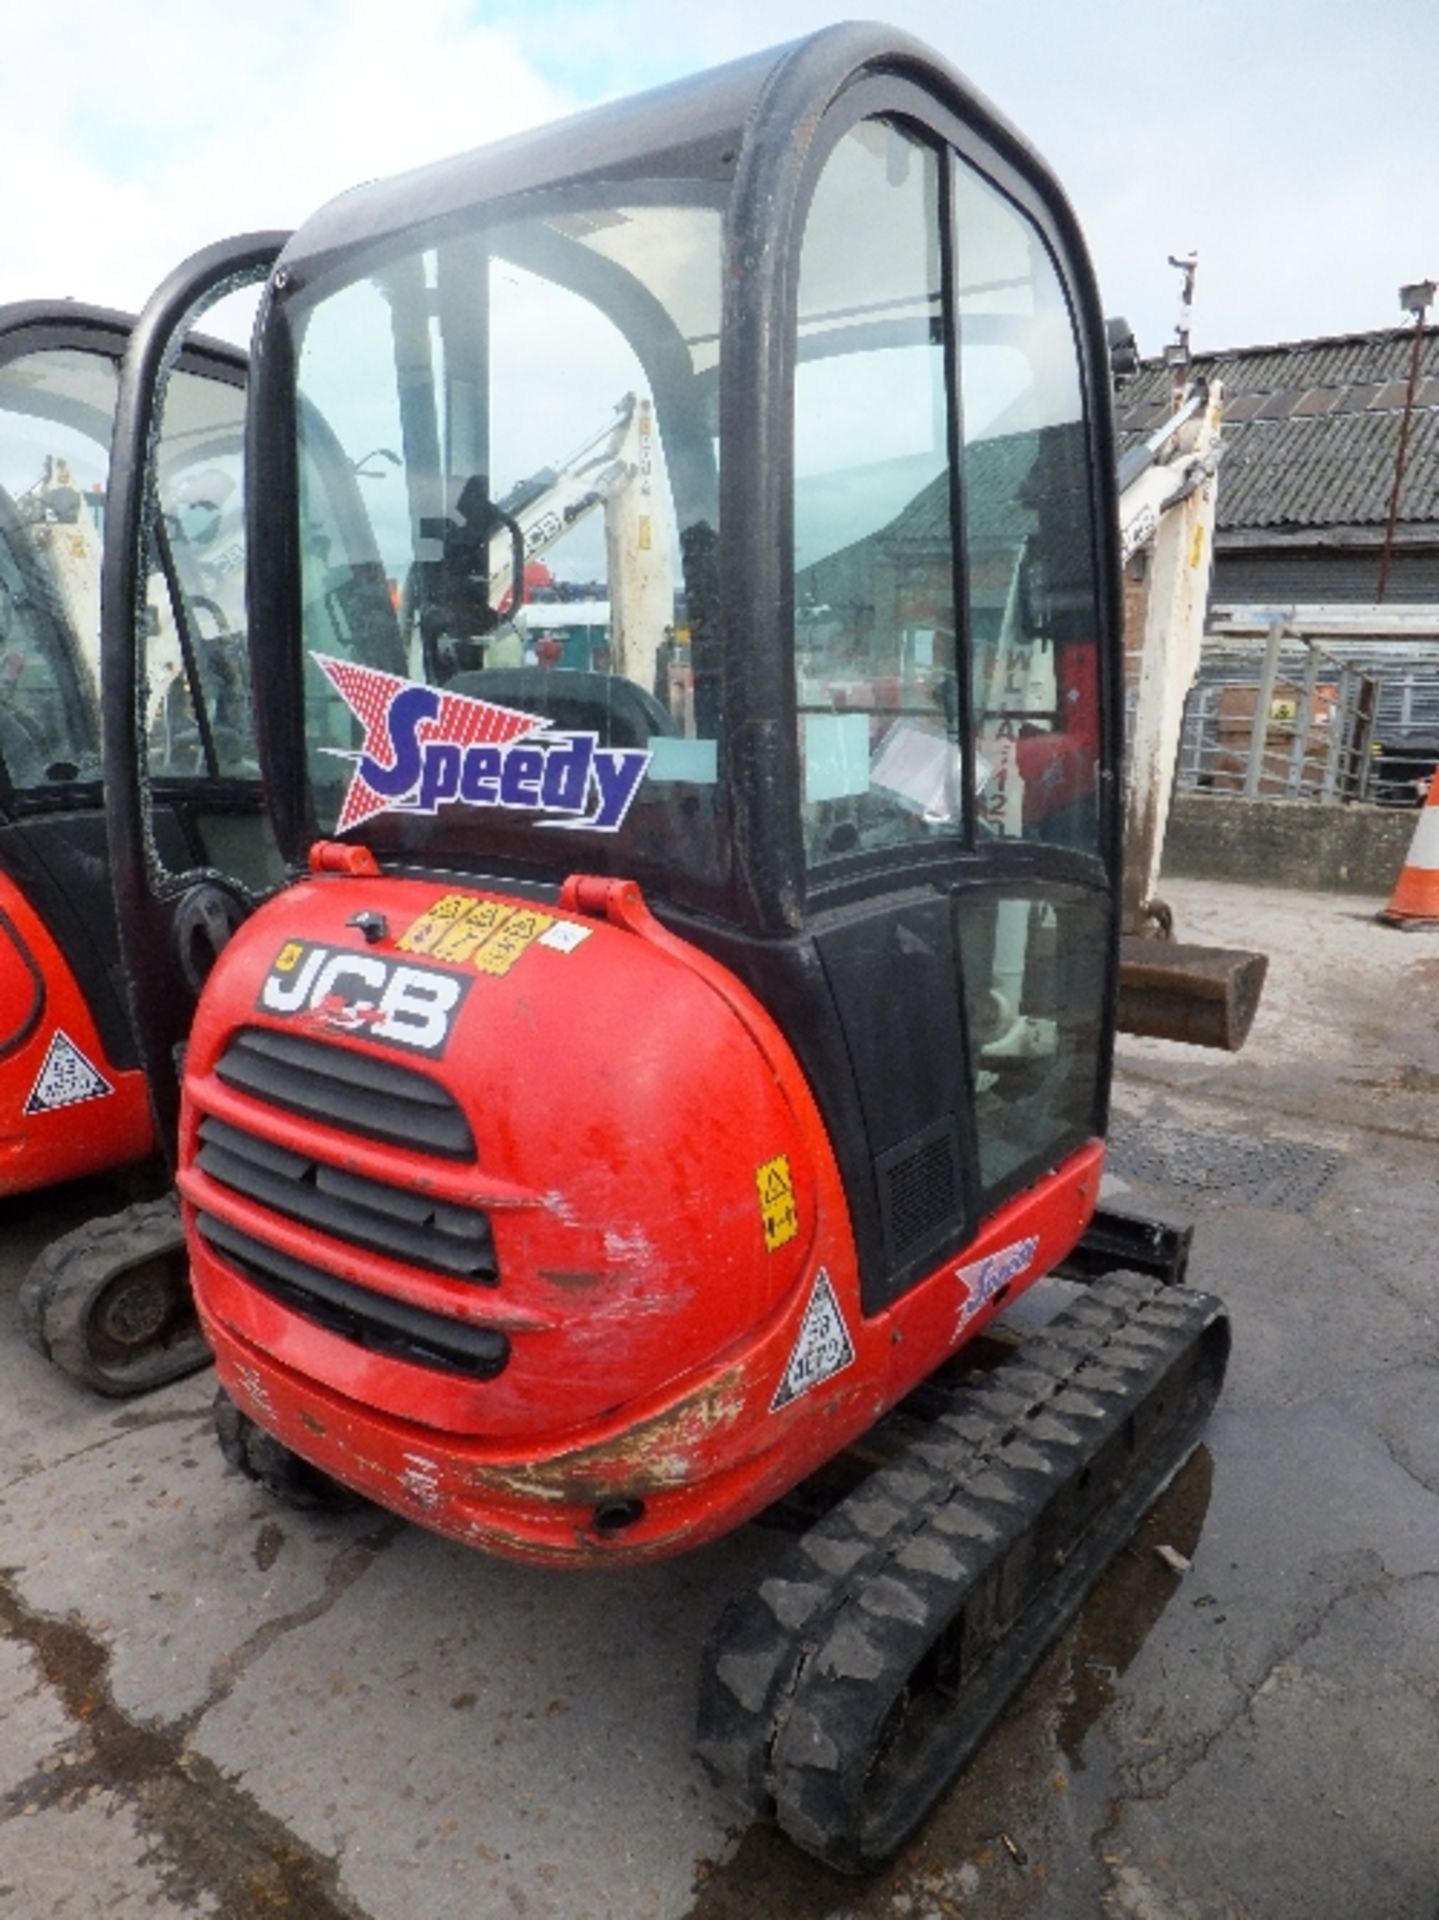 JCB 801.8 CTS mini digger (2011) 941 hrs WLCA112051861 1 bucket, expanding tracks, RDD, coded key - Image 8 of 10